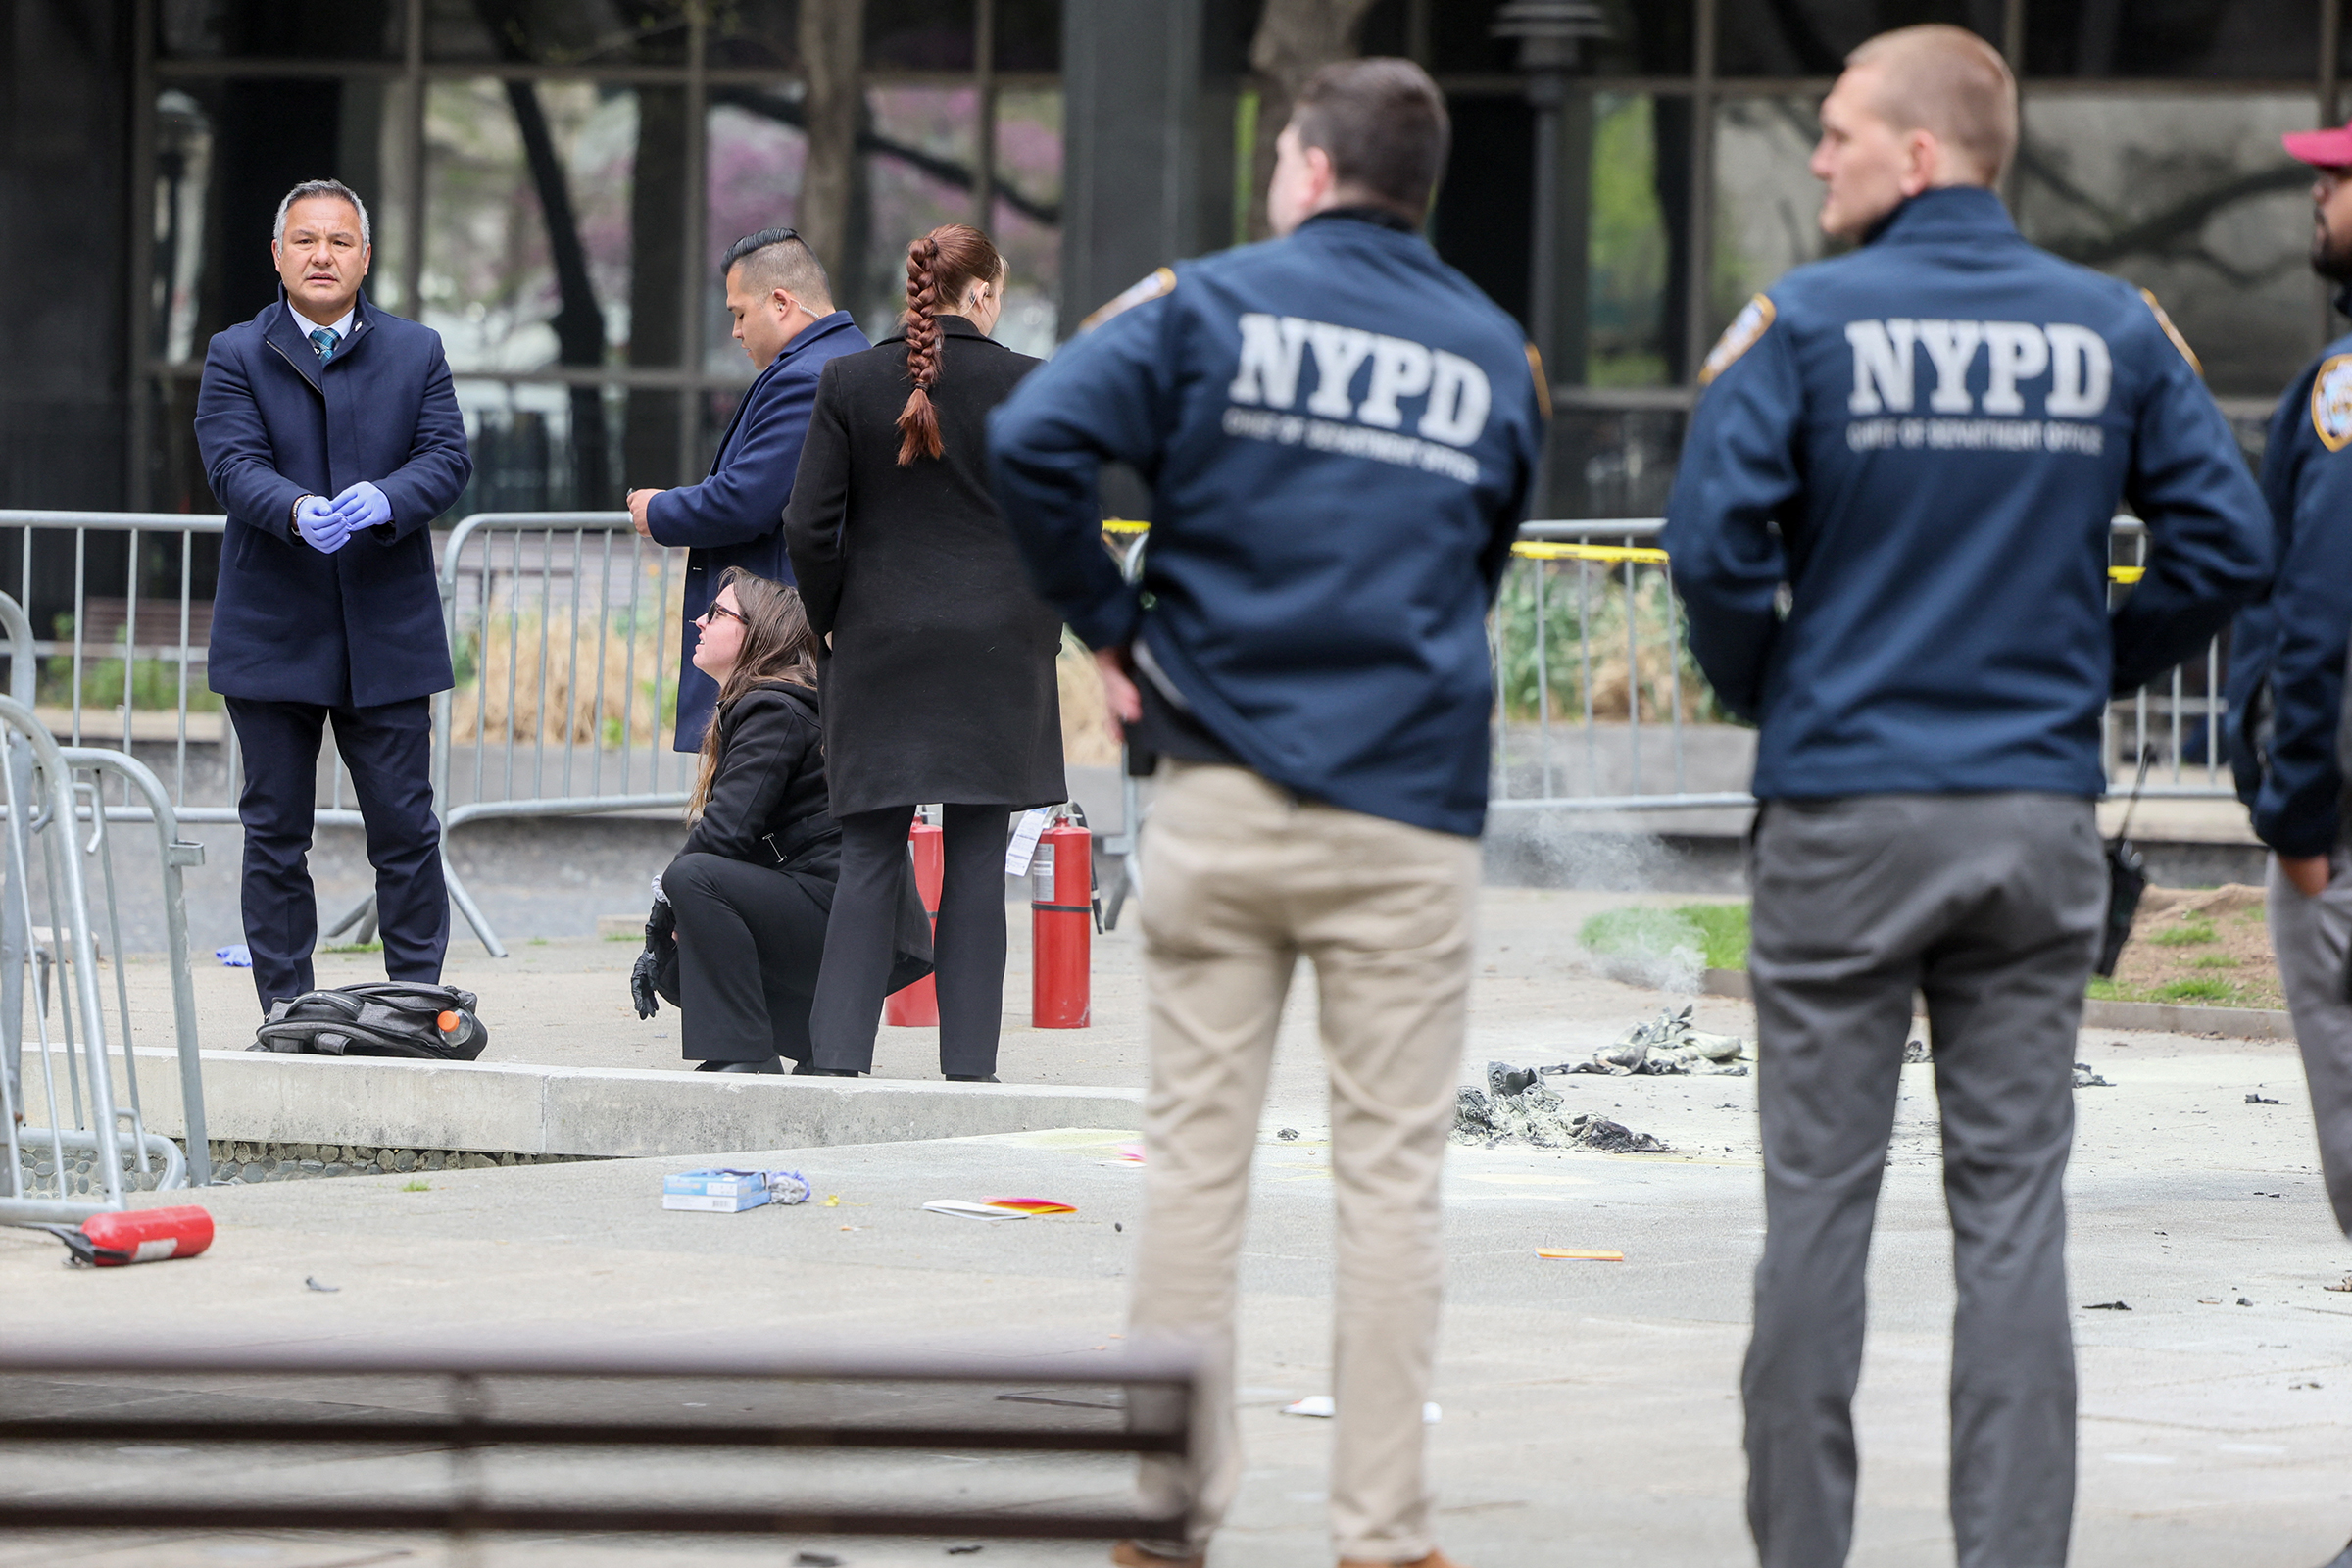 Emergency personnel respond to a report of a person covered in flames outside the courthouse where former President Donald Trump's criminal hush money trial is underway on Friday in New York.